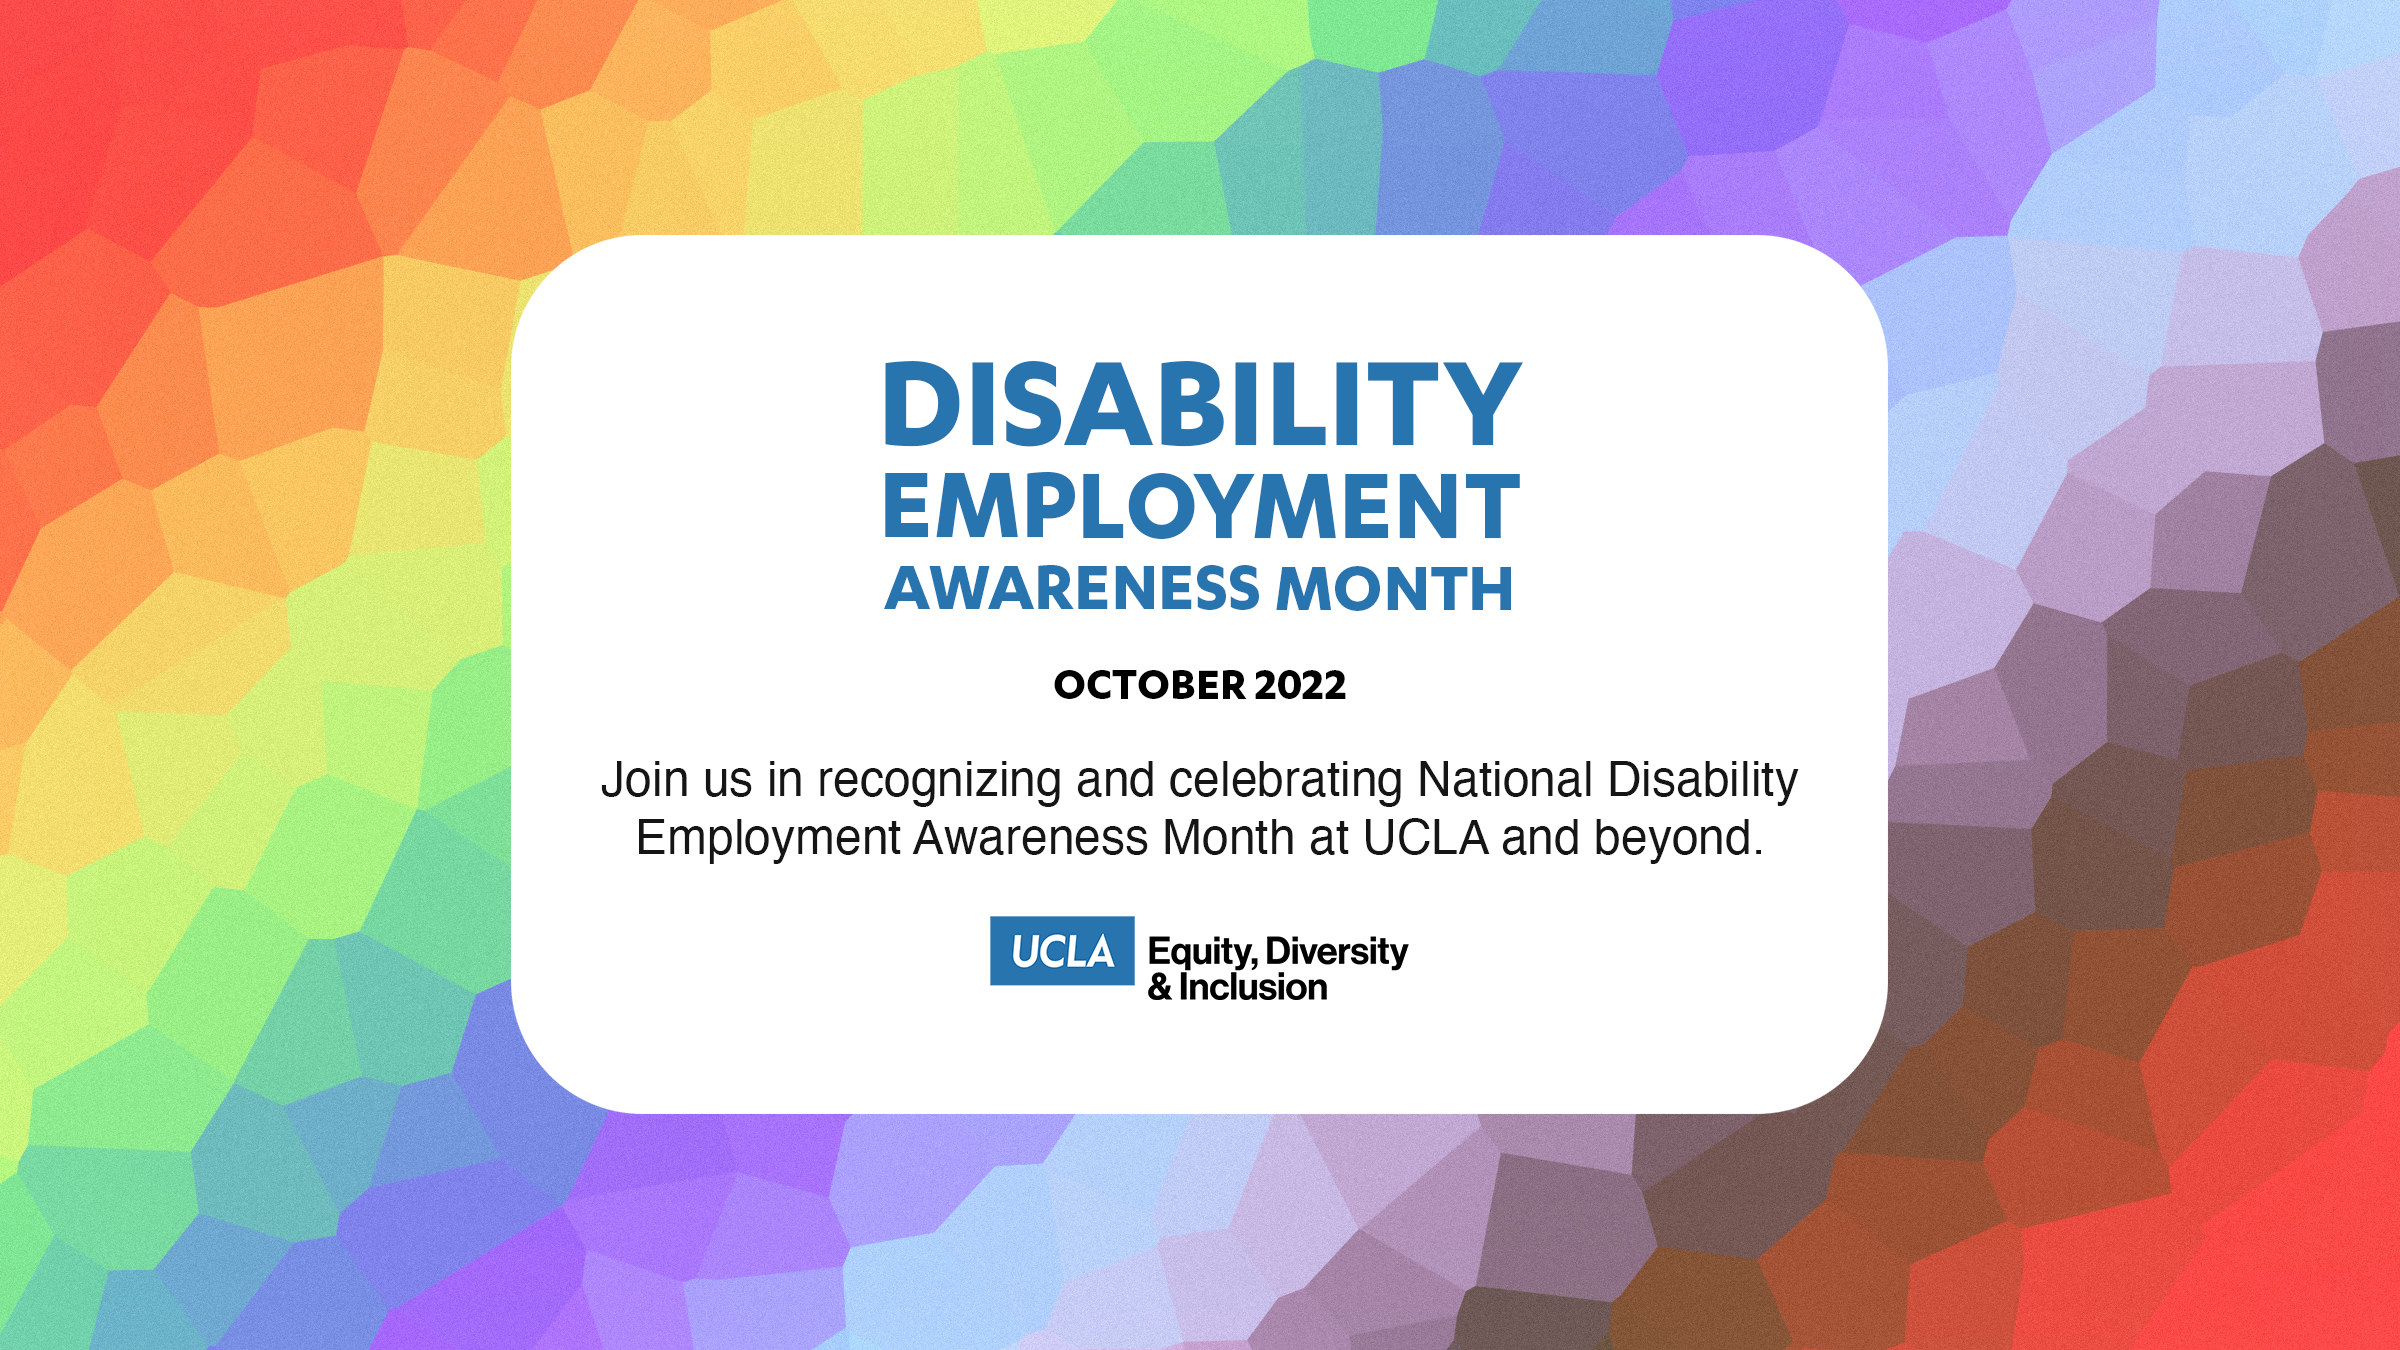 national disability employment awareness month (october 2022) - join us in recognizing and celebrating national disability employment awareness month at ucla and beyond